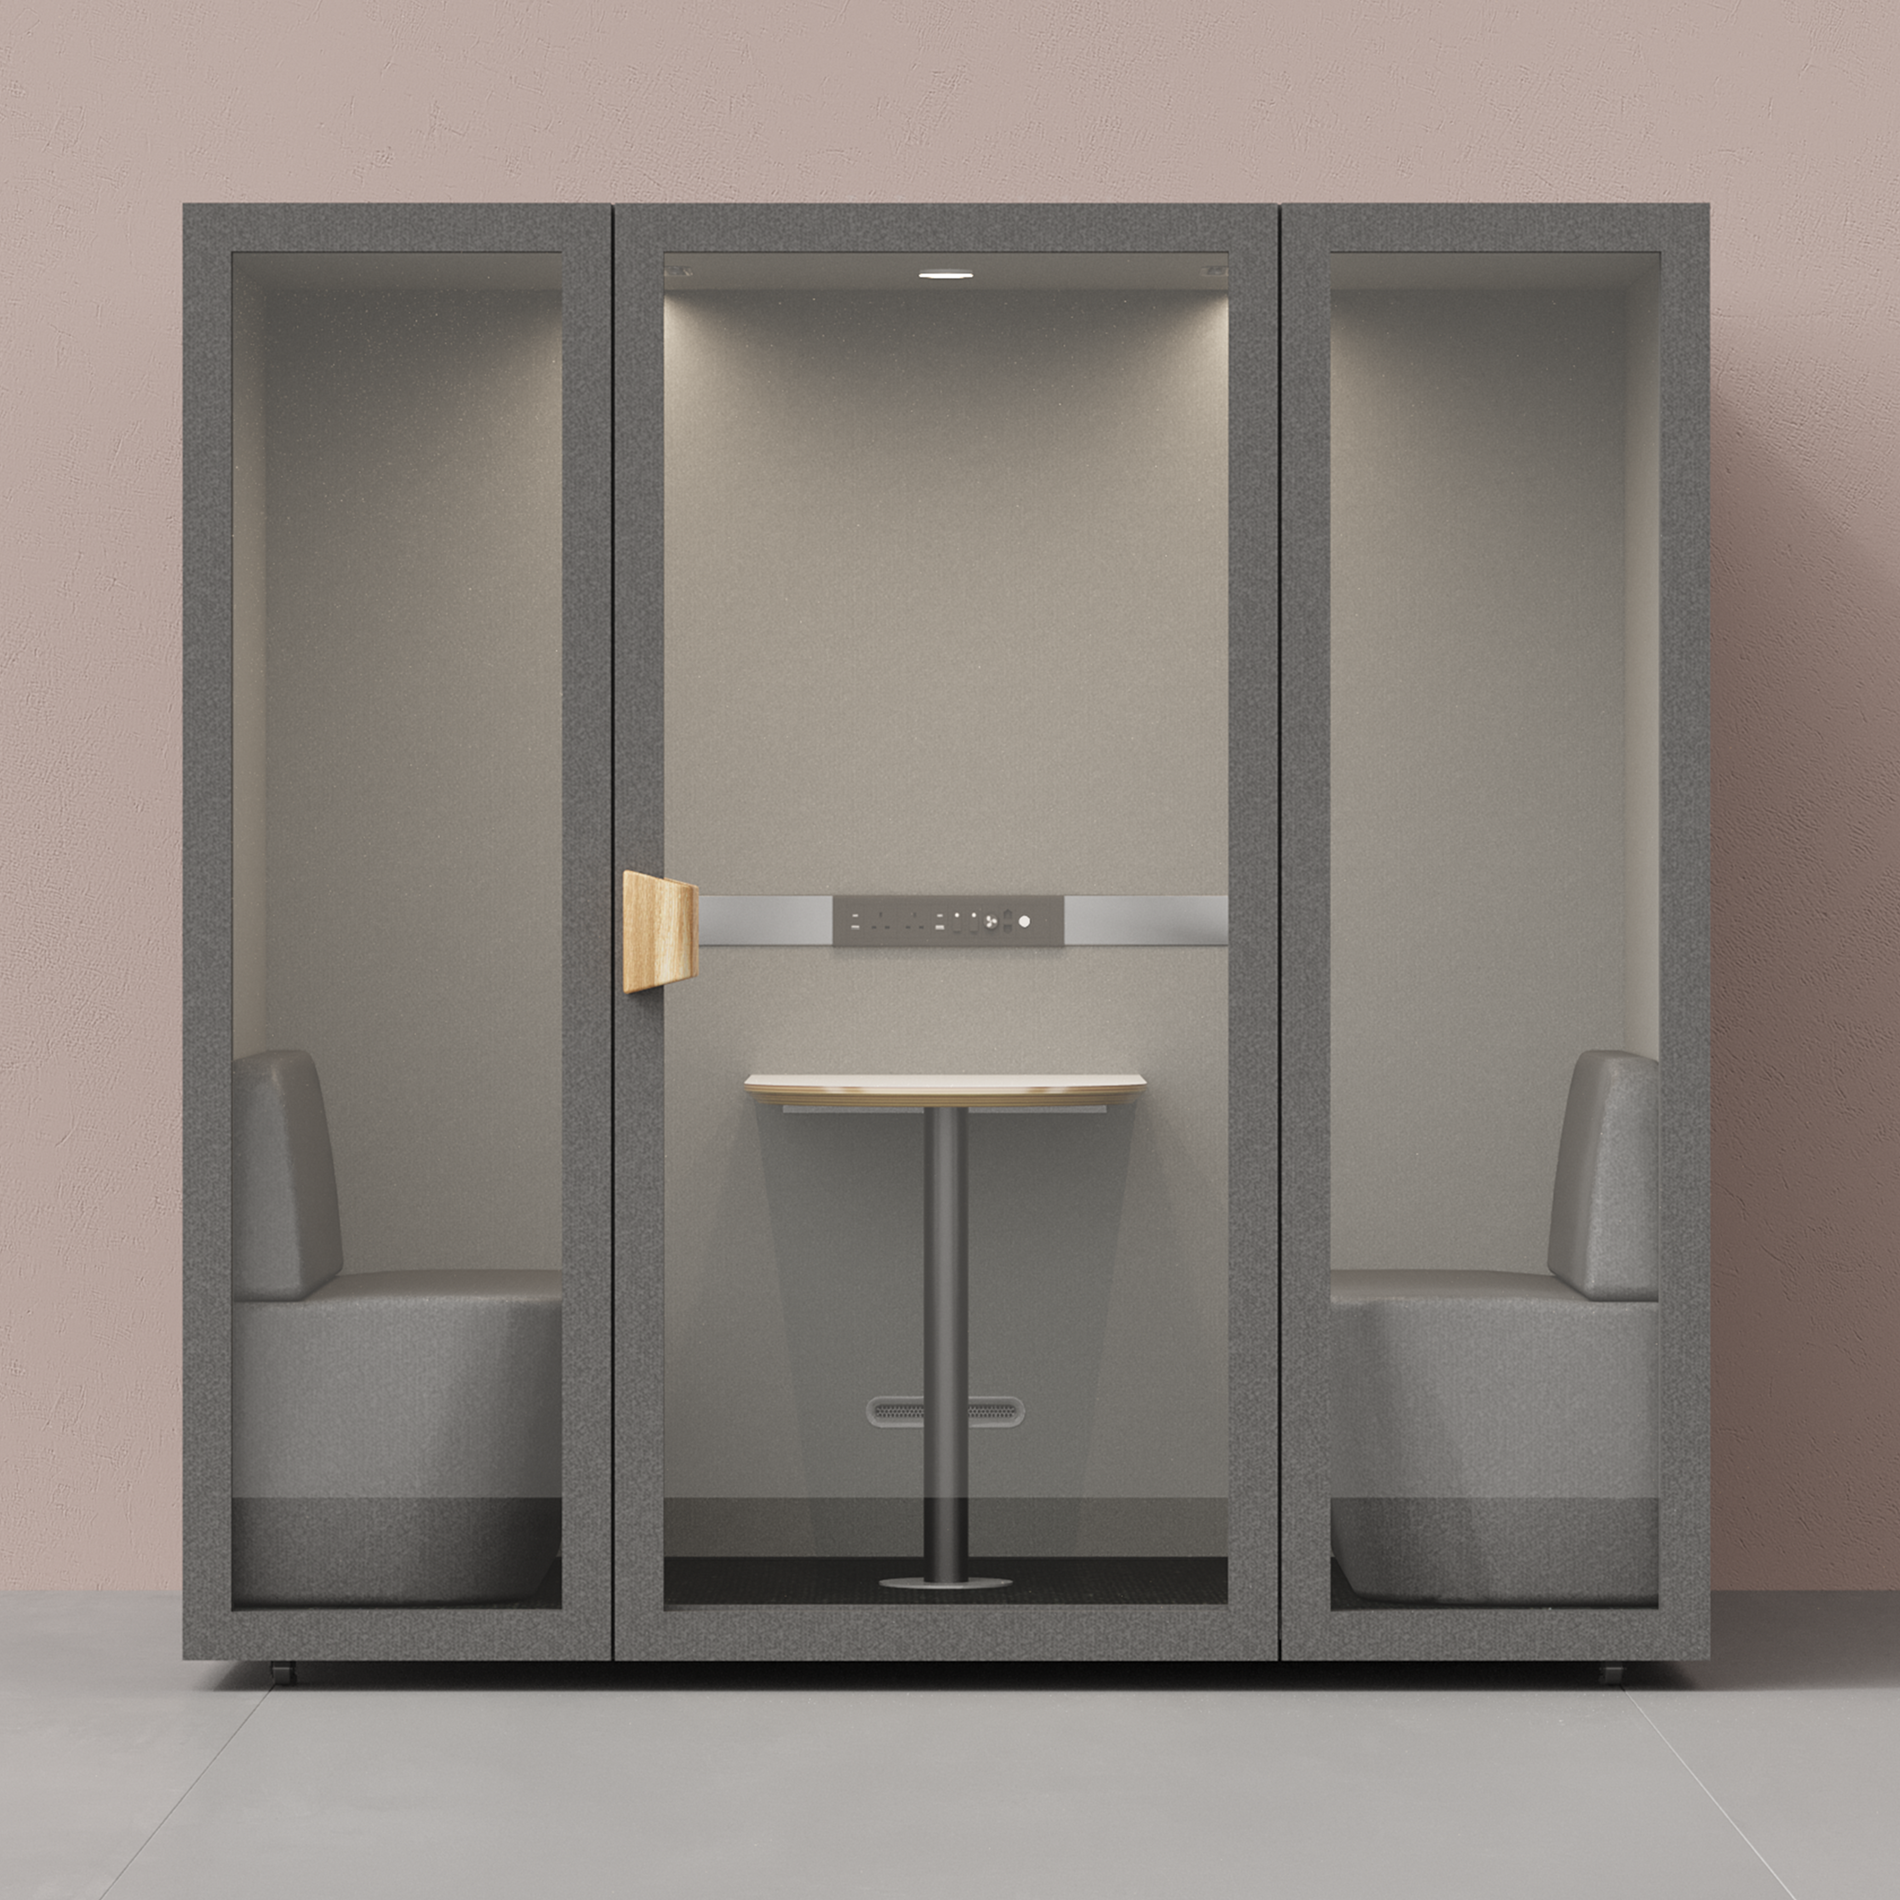 2 - 4 Person Meeting BoothFolio Dark Grey / Furniture As Per Images